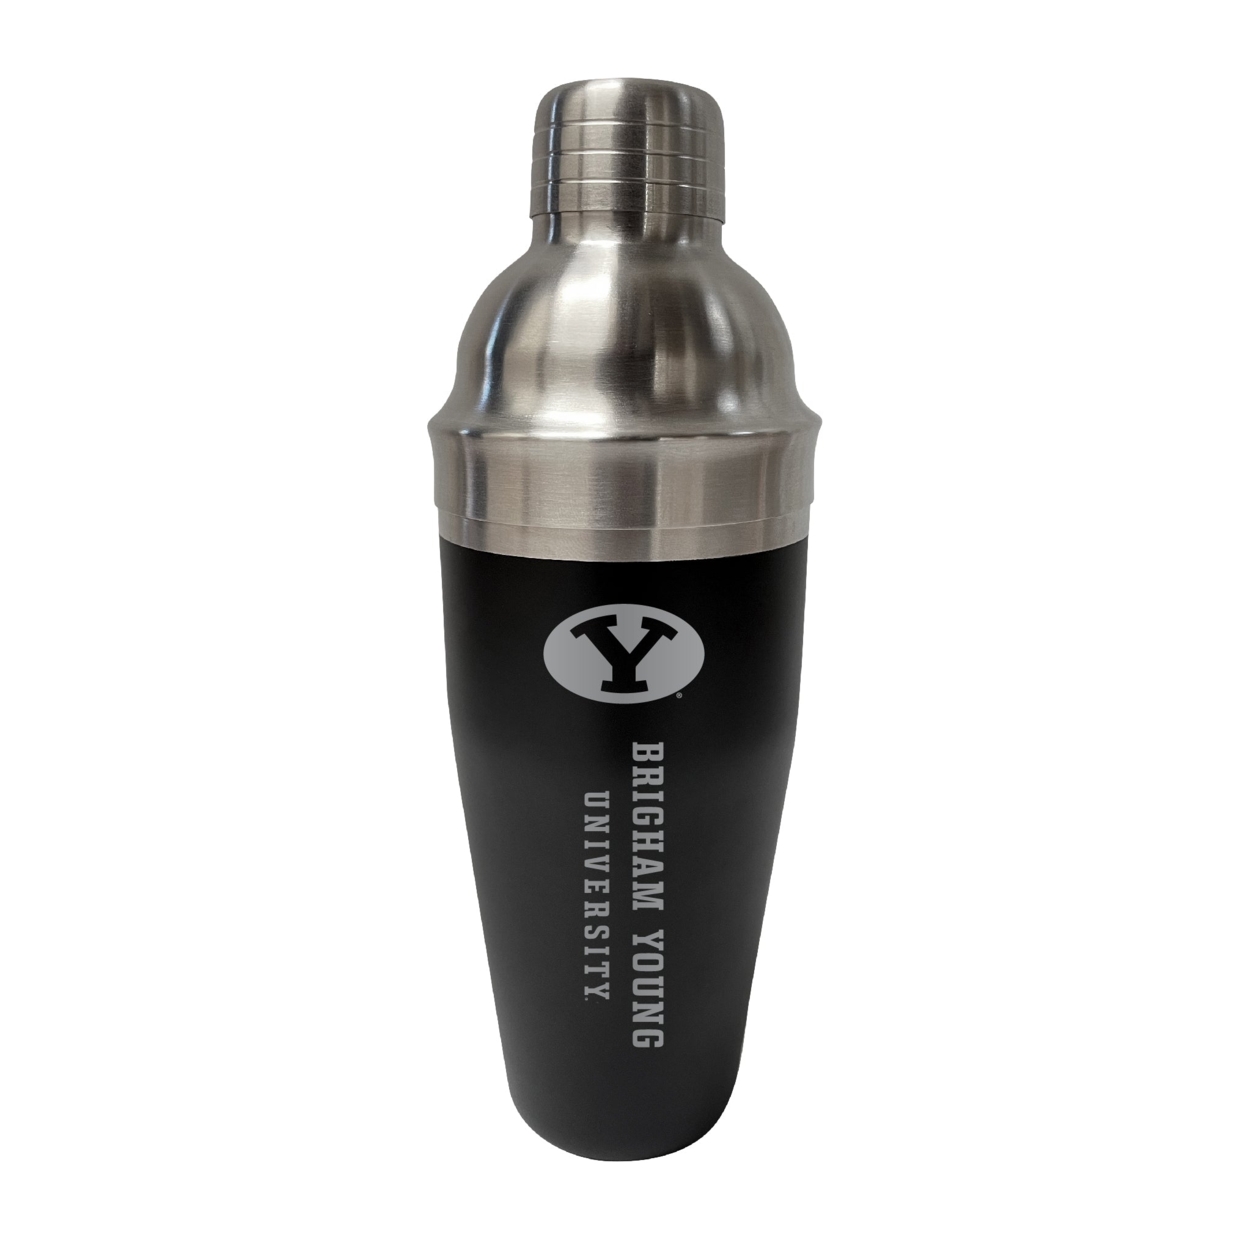 Brigham Young Cougars 24 Oz Stainless Steel Cocktail Shaker